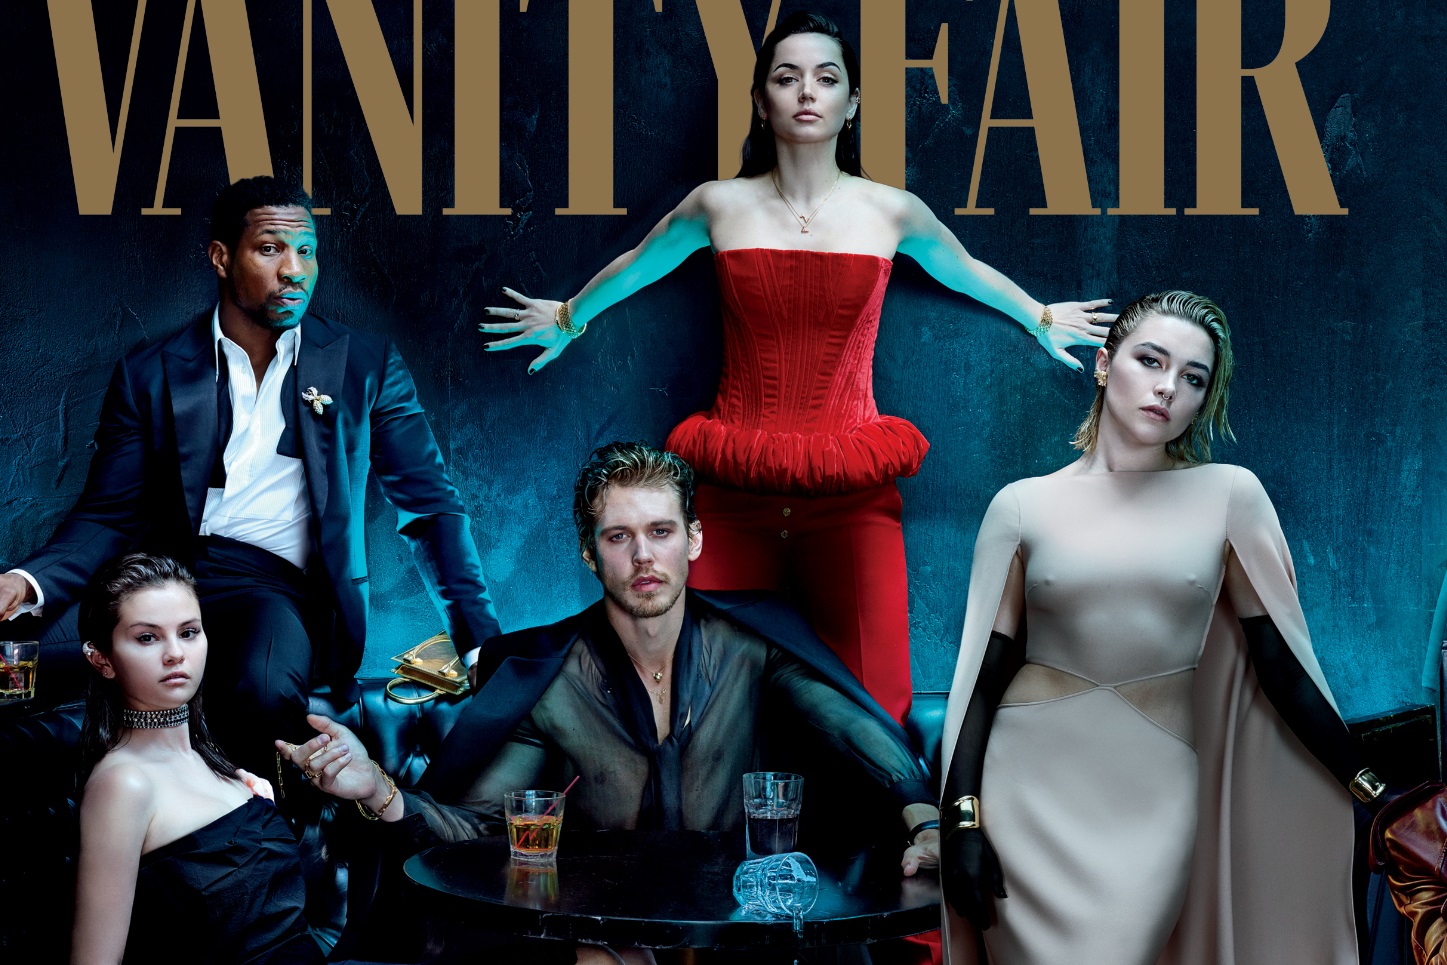 Vanity Fair's Hollywood Issue 2023 Cover: Selena Gomez, Austin Butler,  Florence Pugh & More